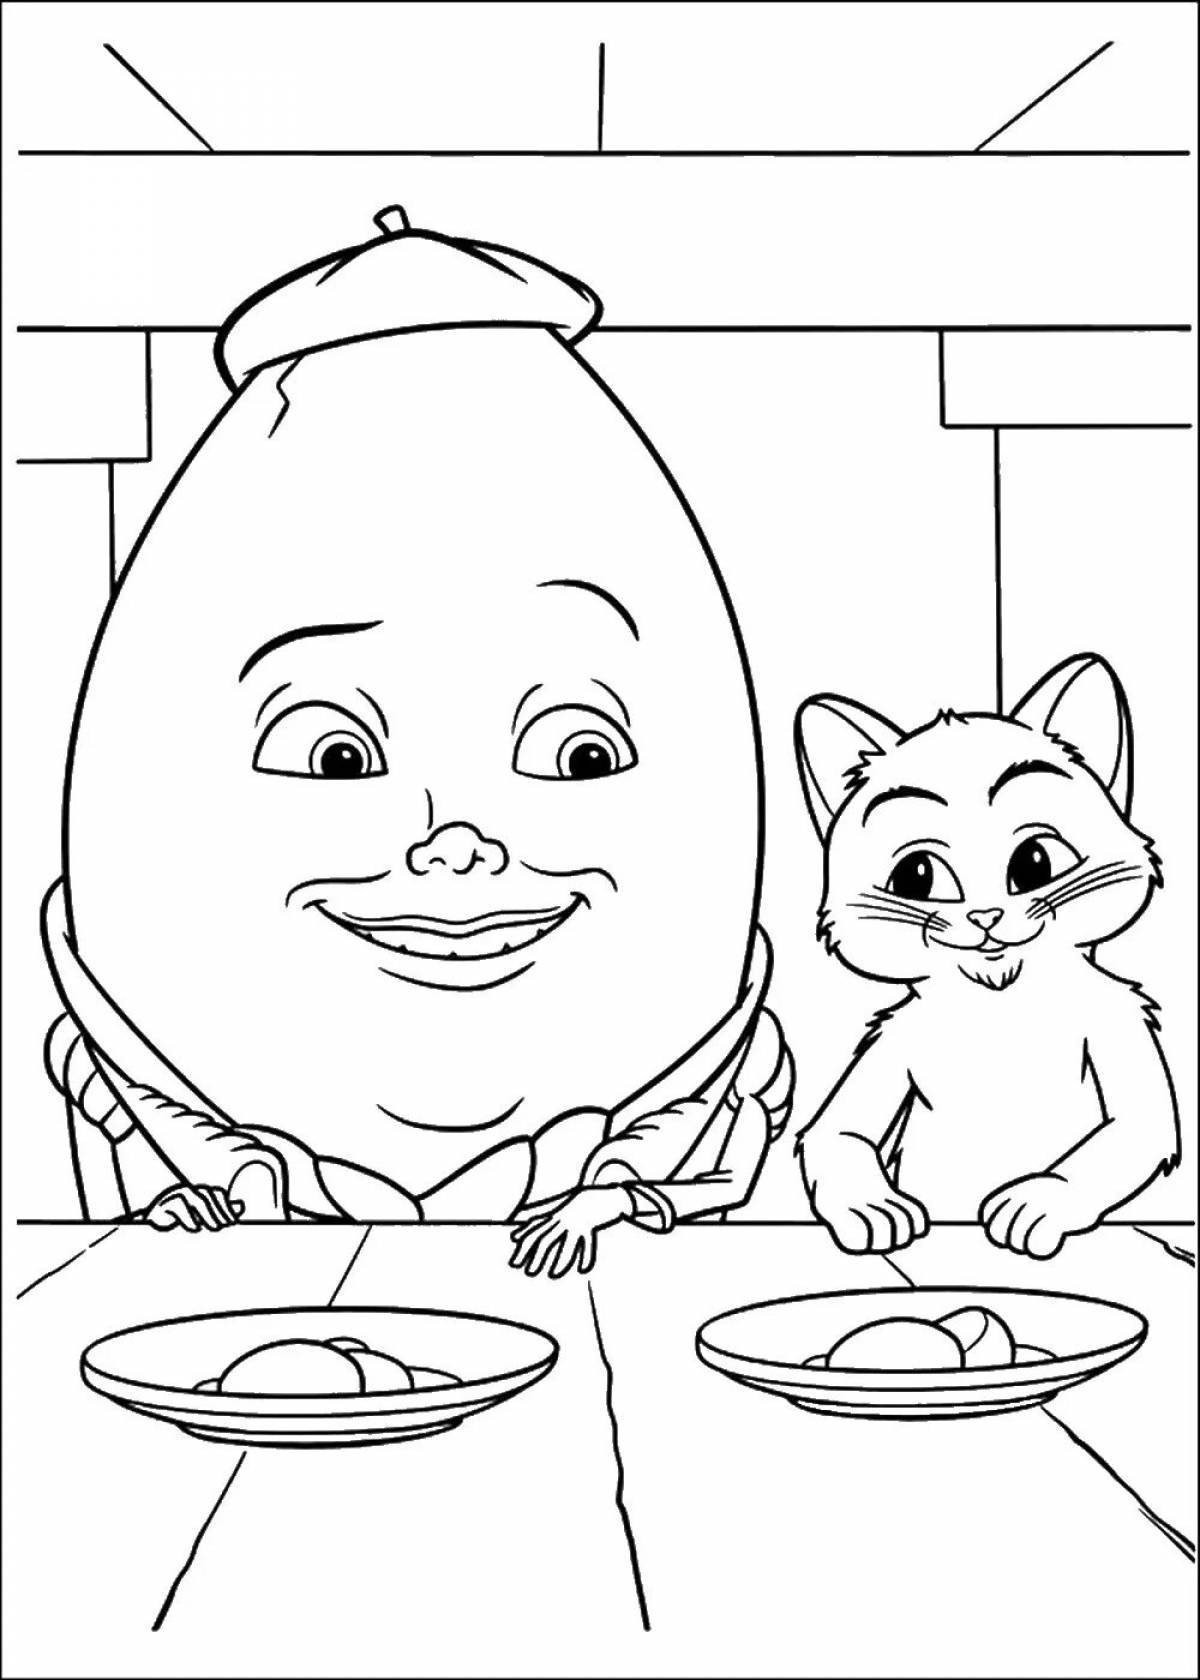 Red cat coloring page